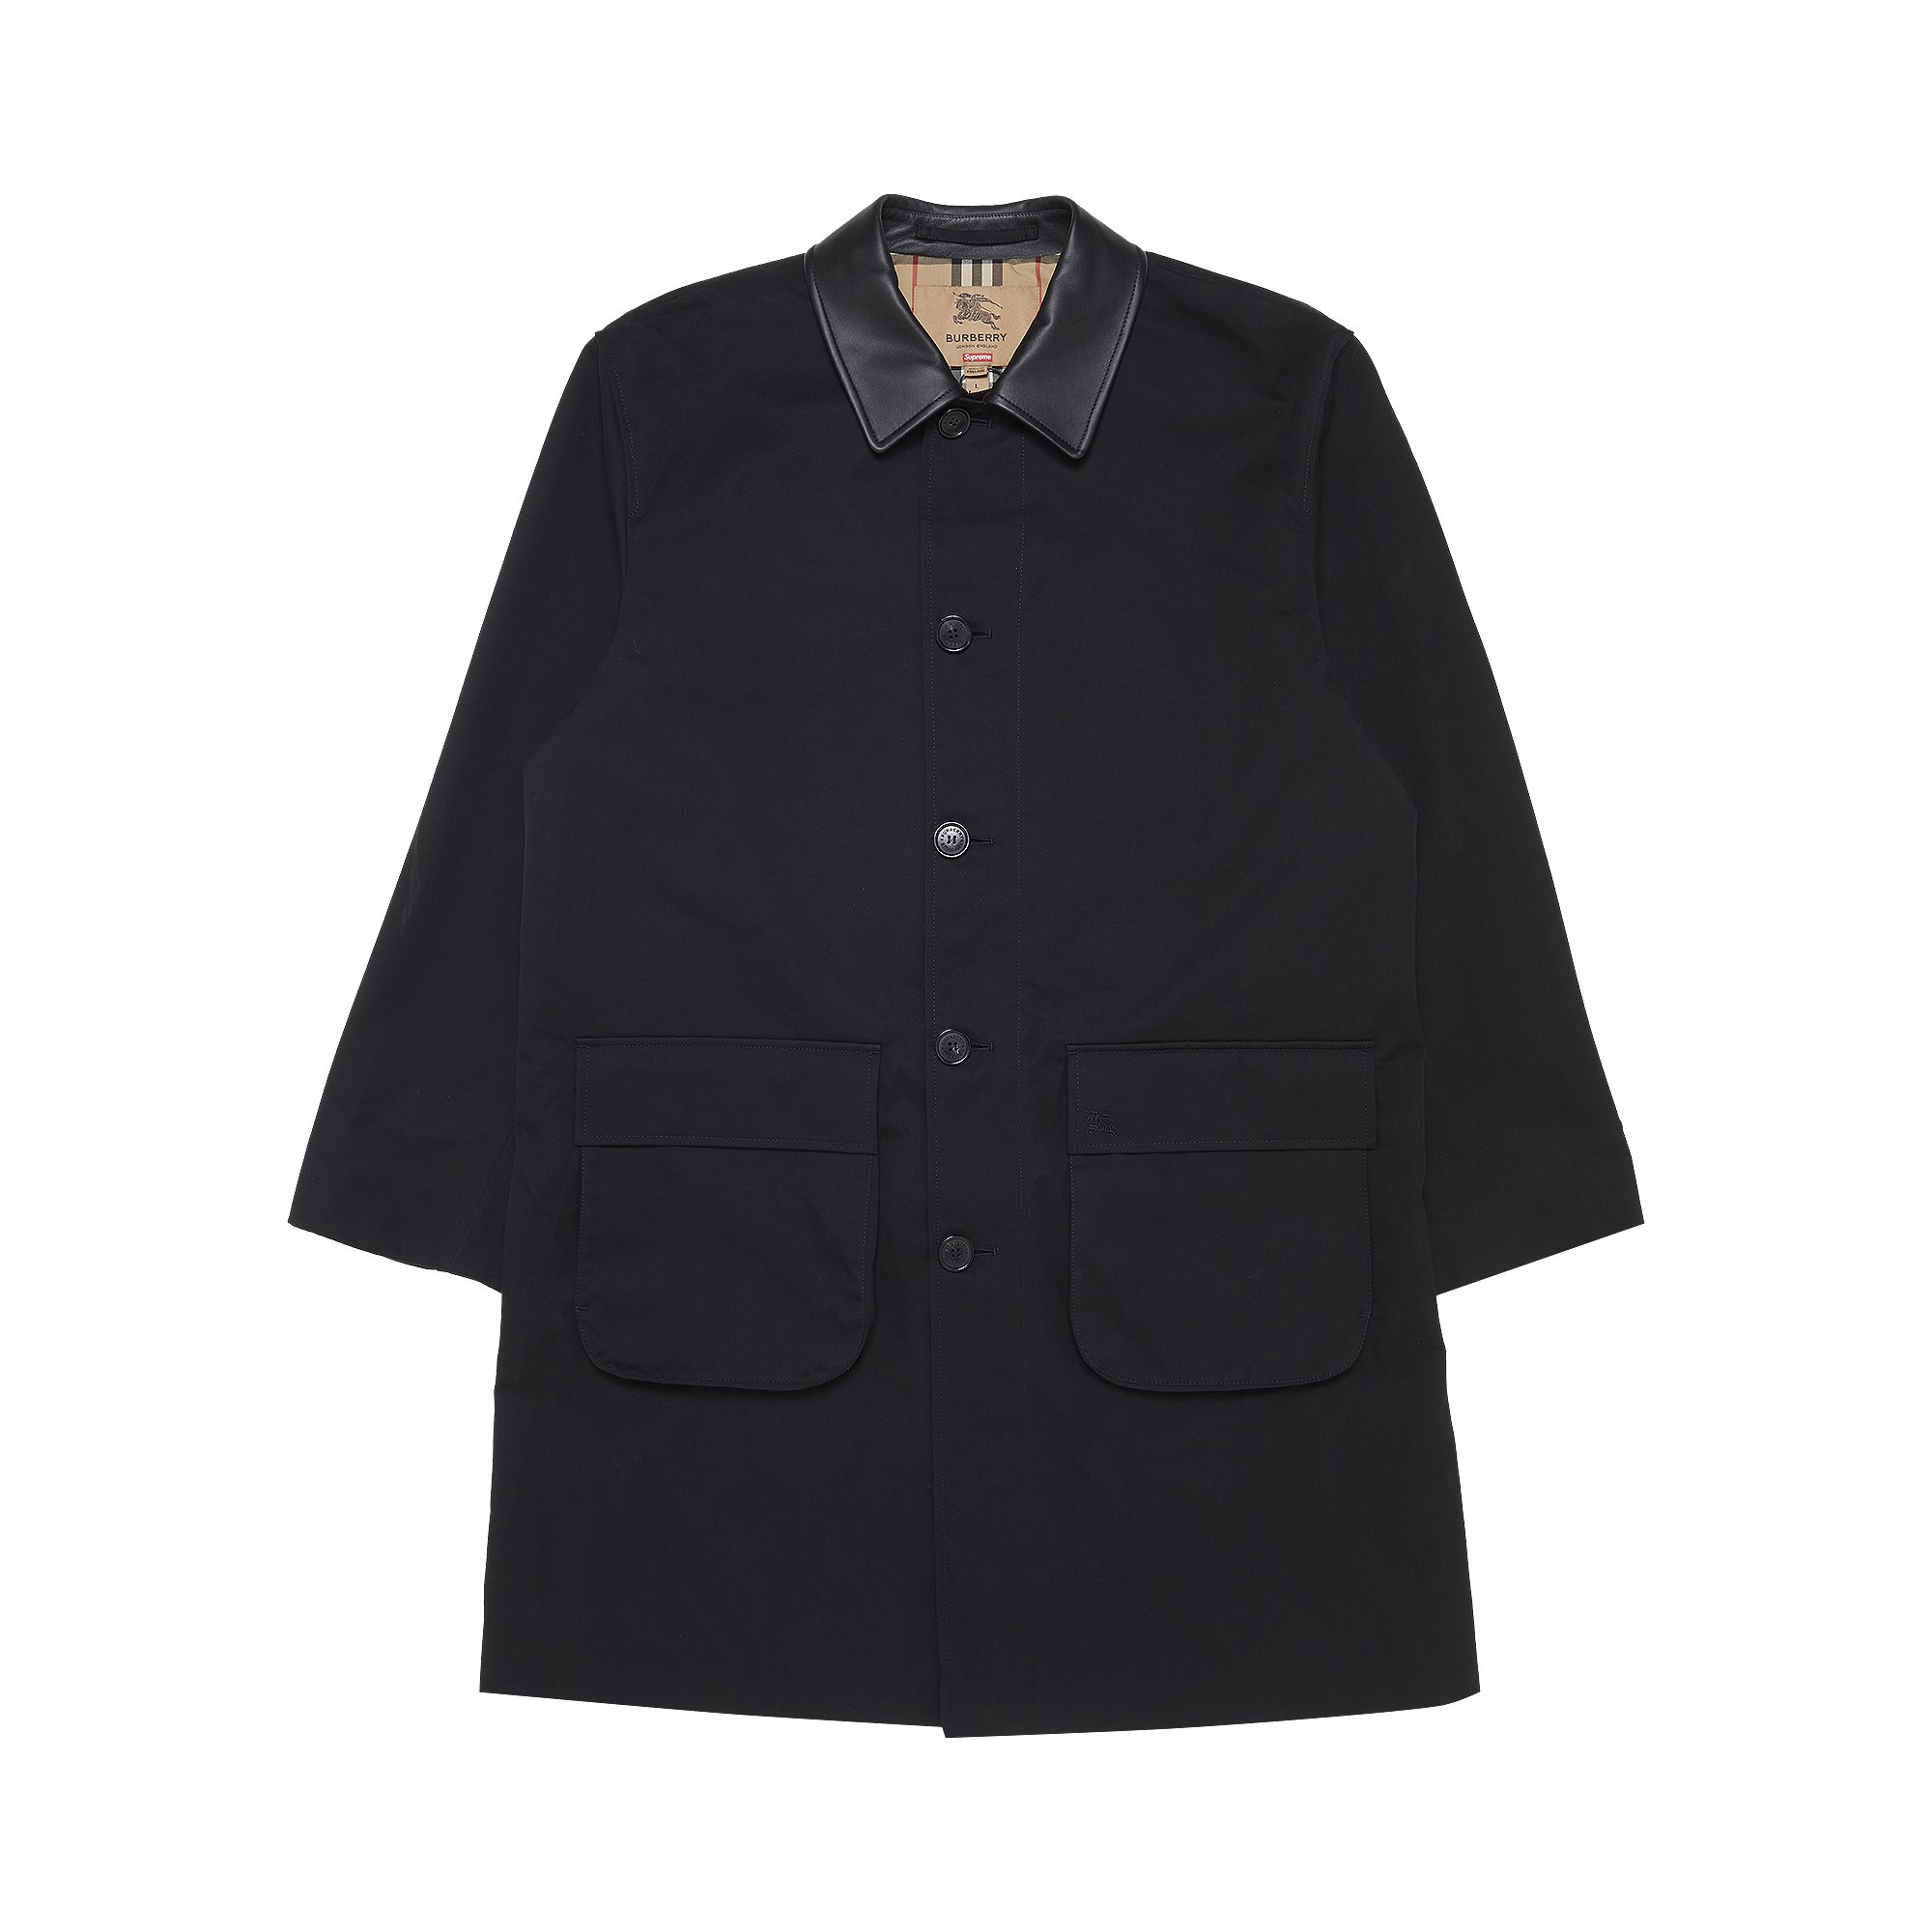 Supreme x Burberry Leather Collar Trench 'Black' | GOAT